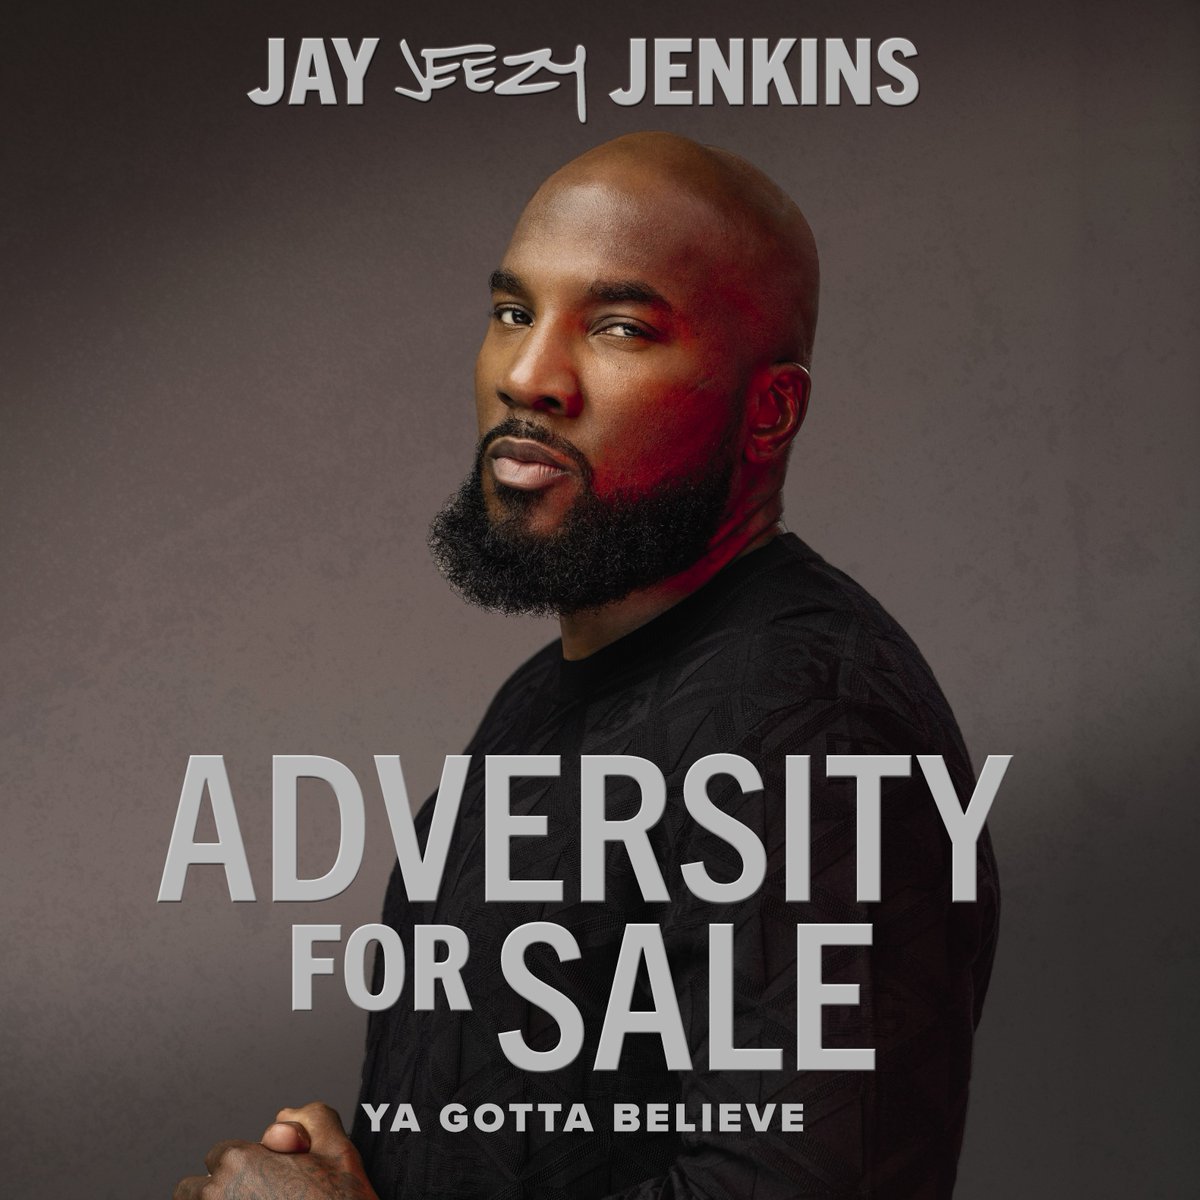 Now Available! In his first book, 'Adversity for Sale: Ya Gotta Believe', Jeezy shares never heard stories of what it took for him to beat the odds and get out of the streets and the lessons that changed his life and business. Find it online and in stores today!